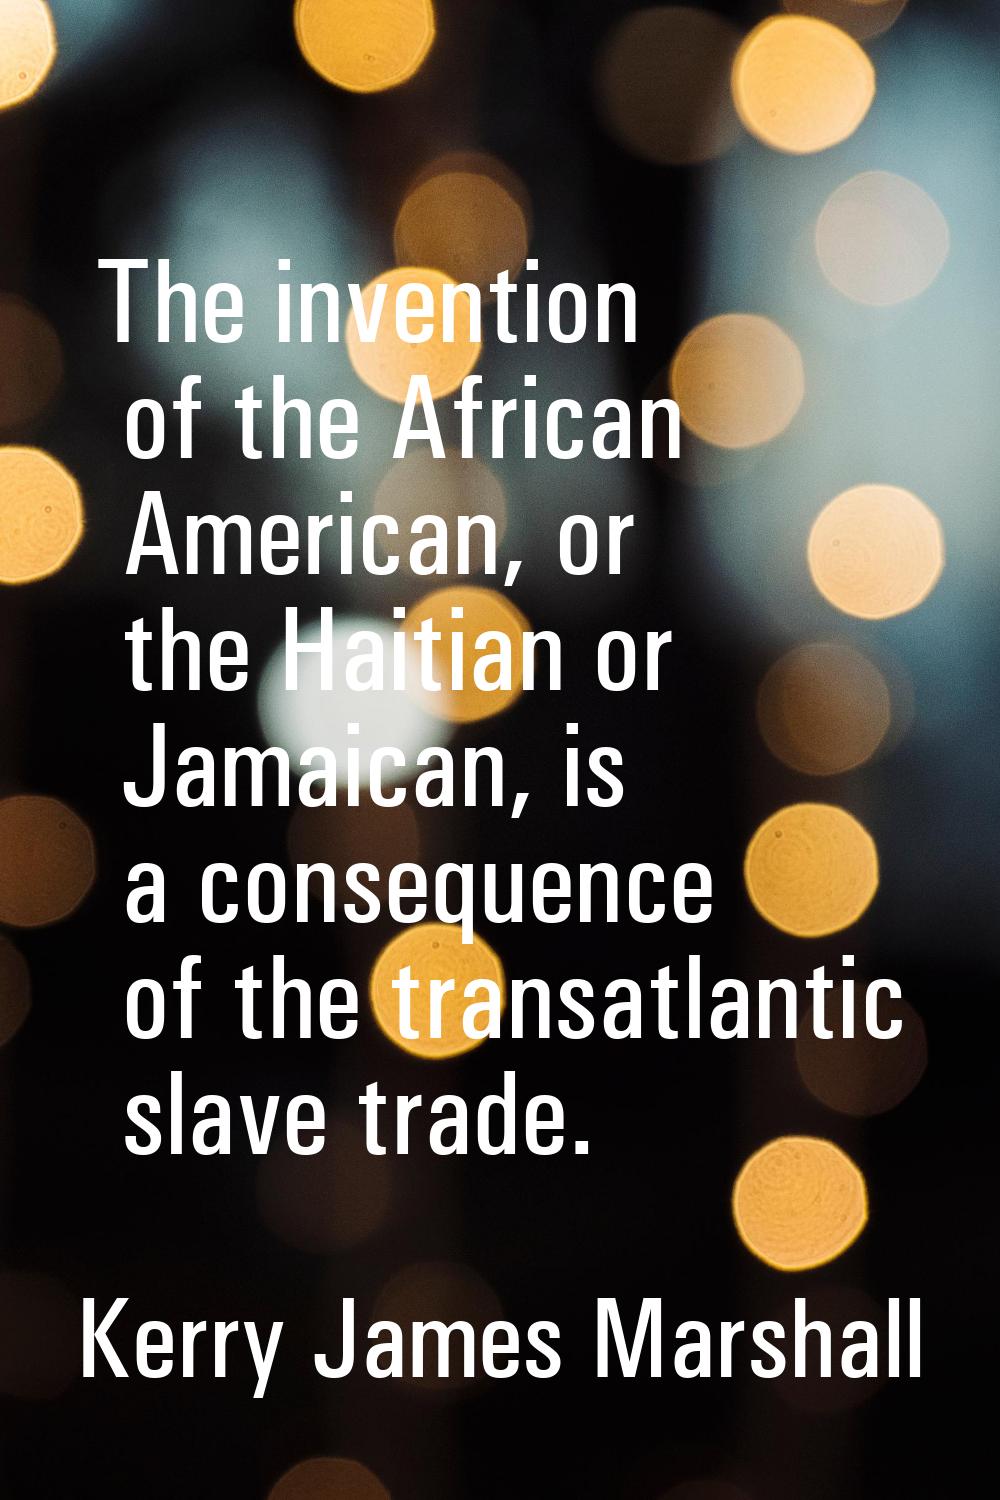 The invention of the African American, or the Haitian or Jamaican, is a consequence of the transatl